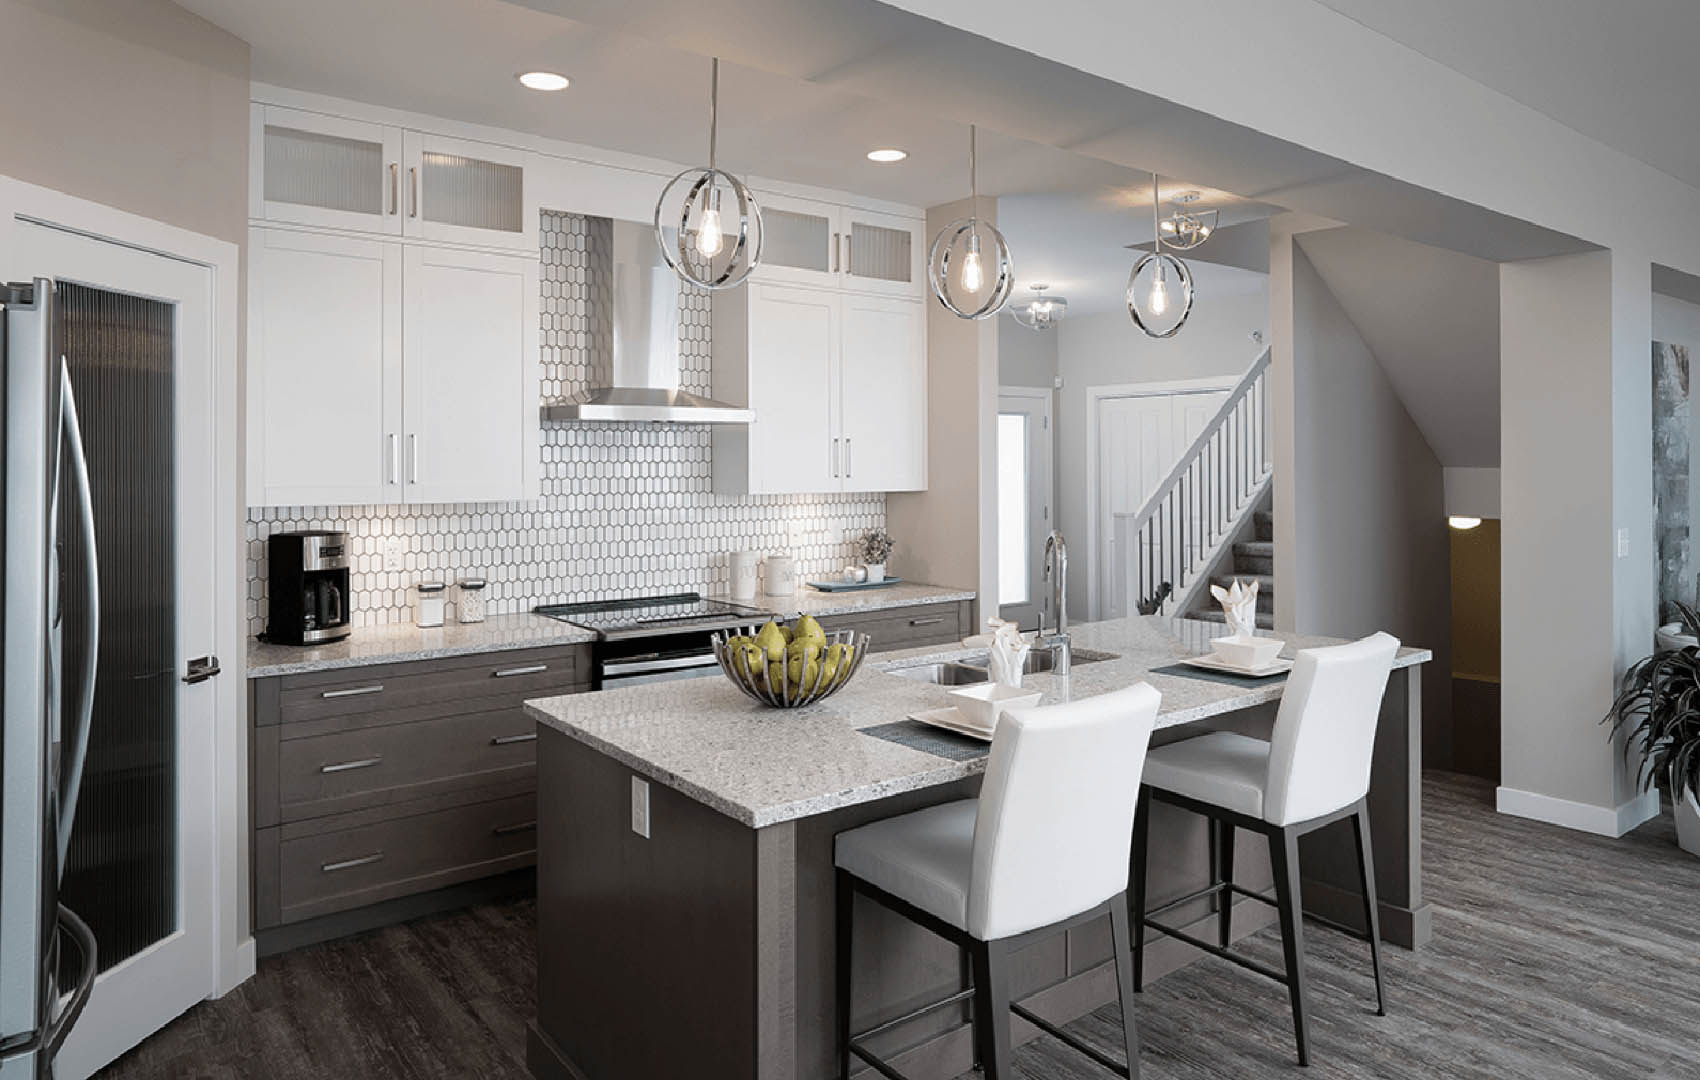 Sneak Peak at a New Broadview Showhome Kitchen Image